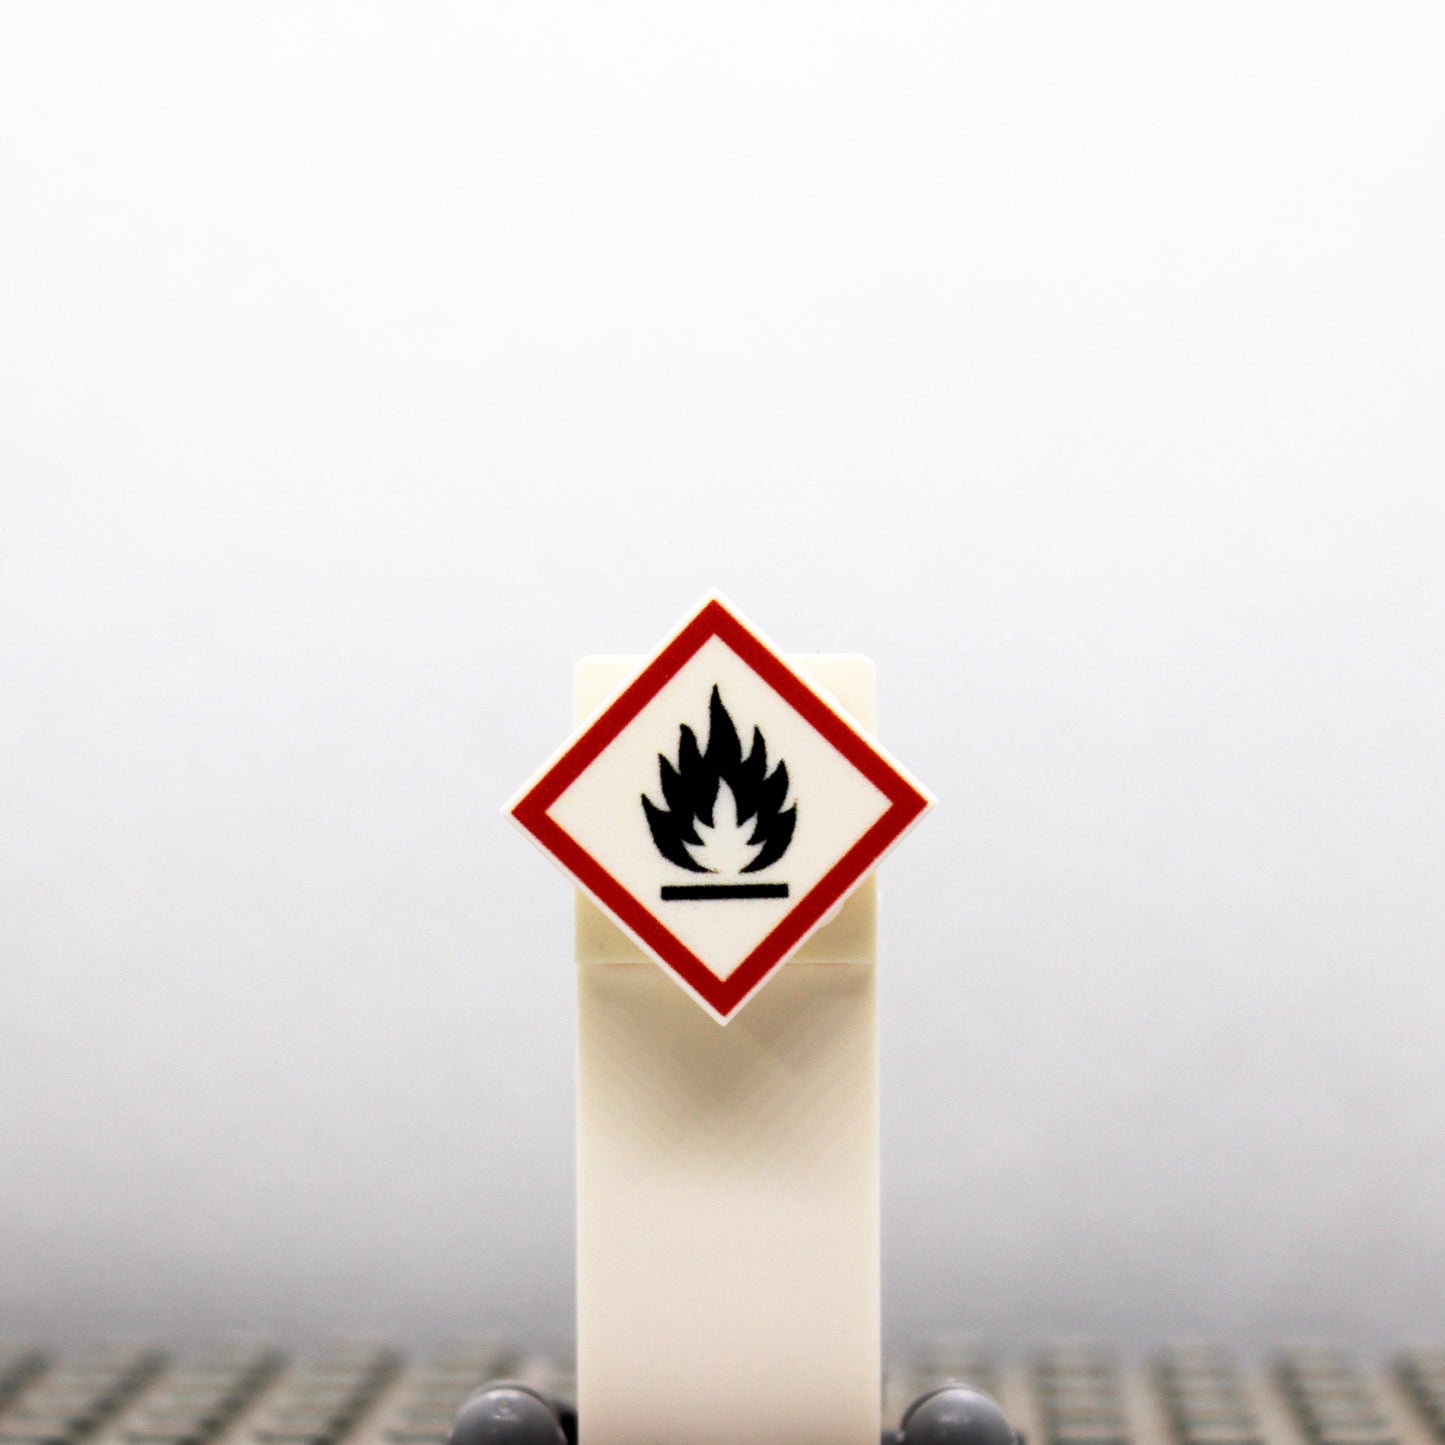 "GHS highly flammable" 2x2 tile